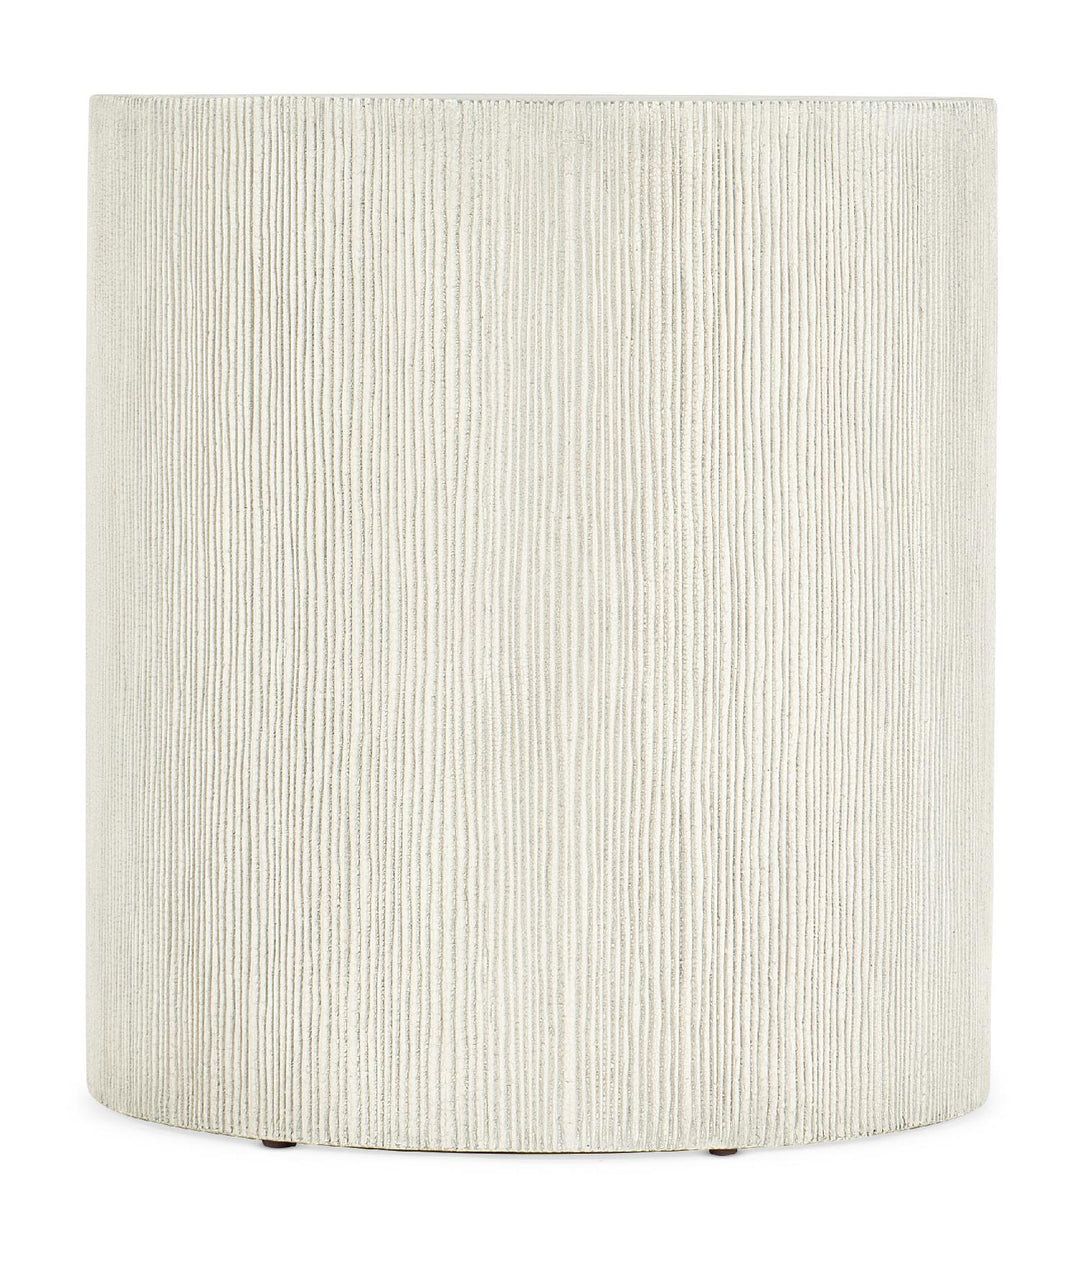 American Home Furniture | Hooker Furniture - Serenity Swale Round Side Table